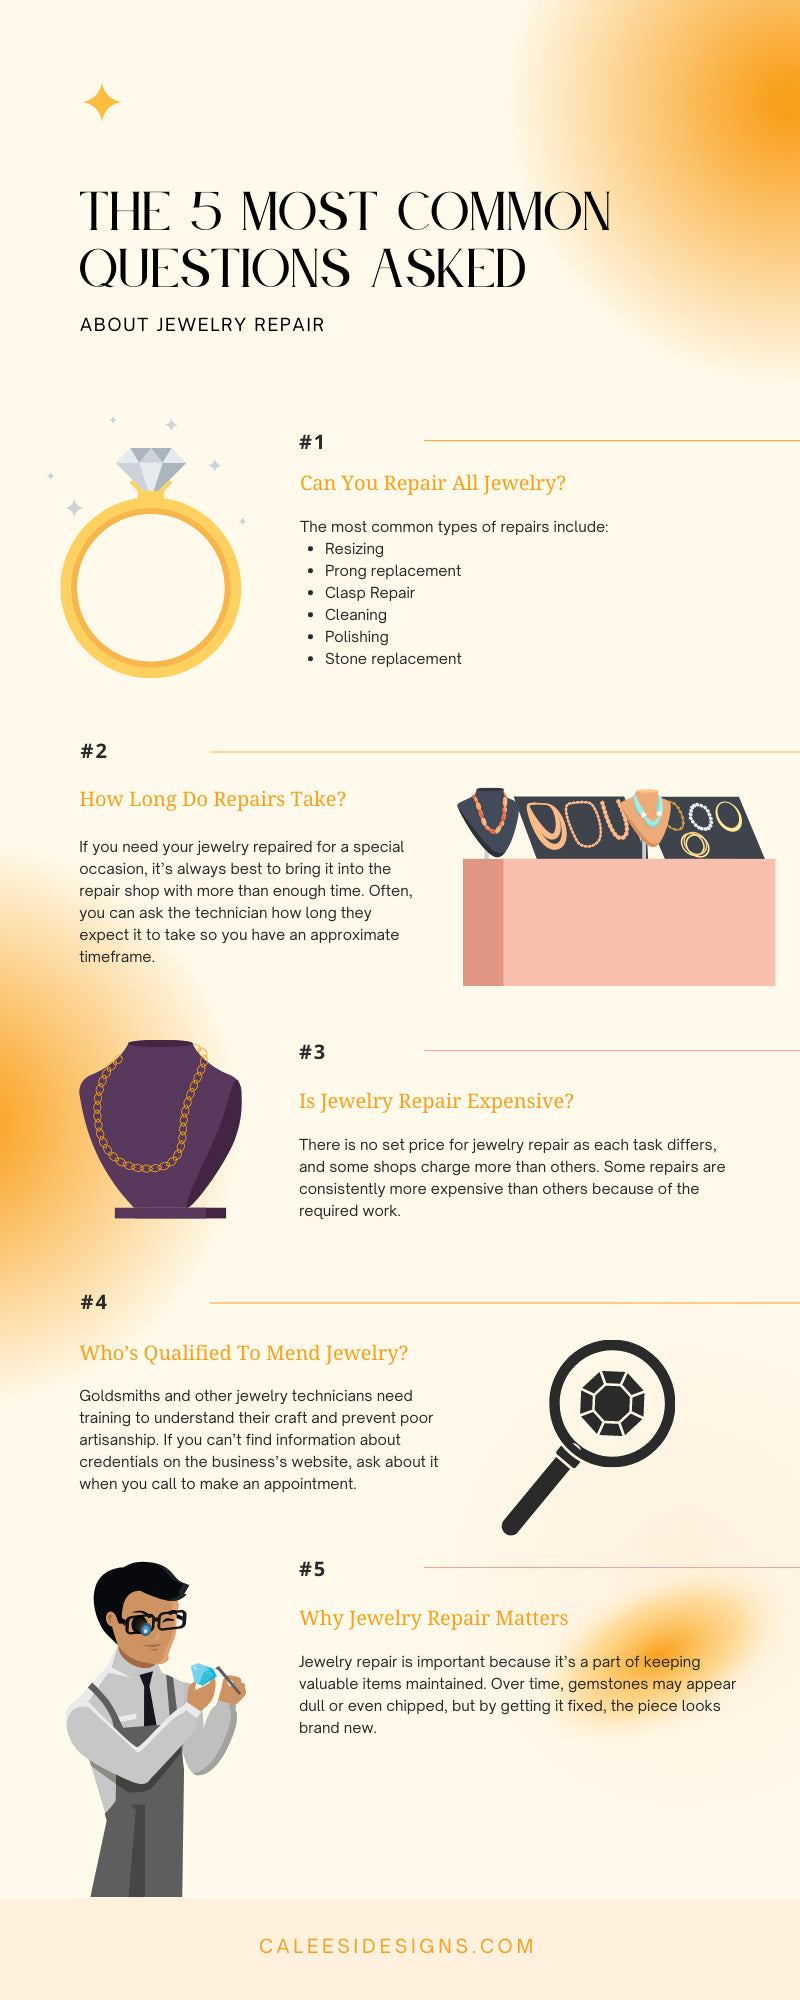 The 5 Most Common Questions Asked About Jewelry Repair